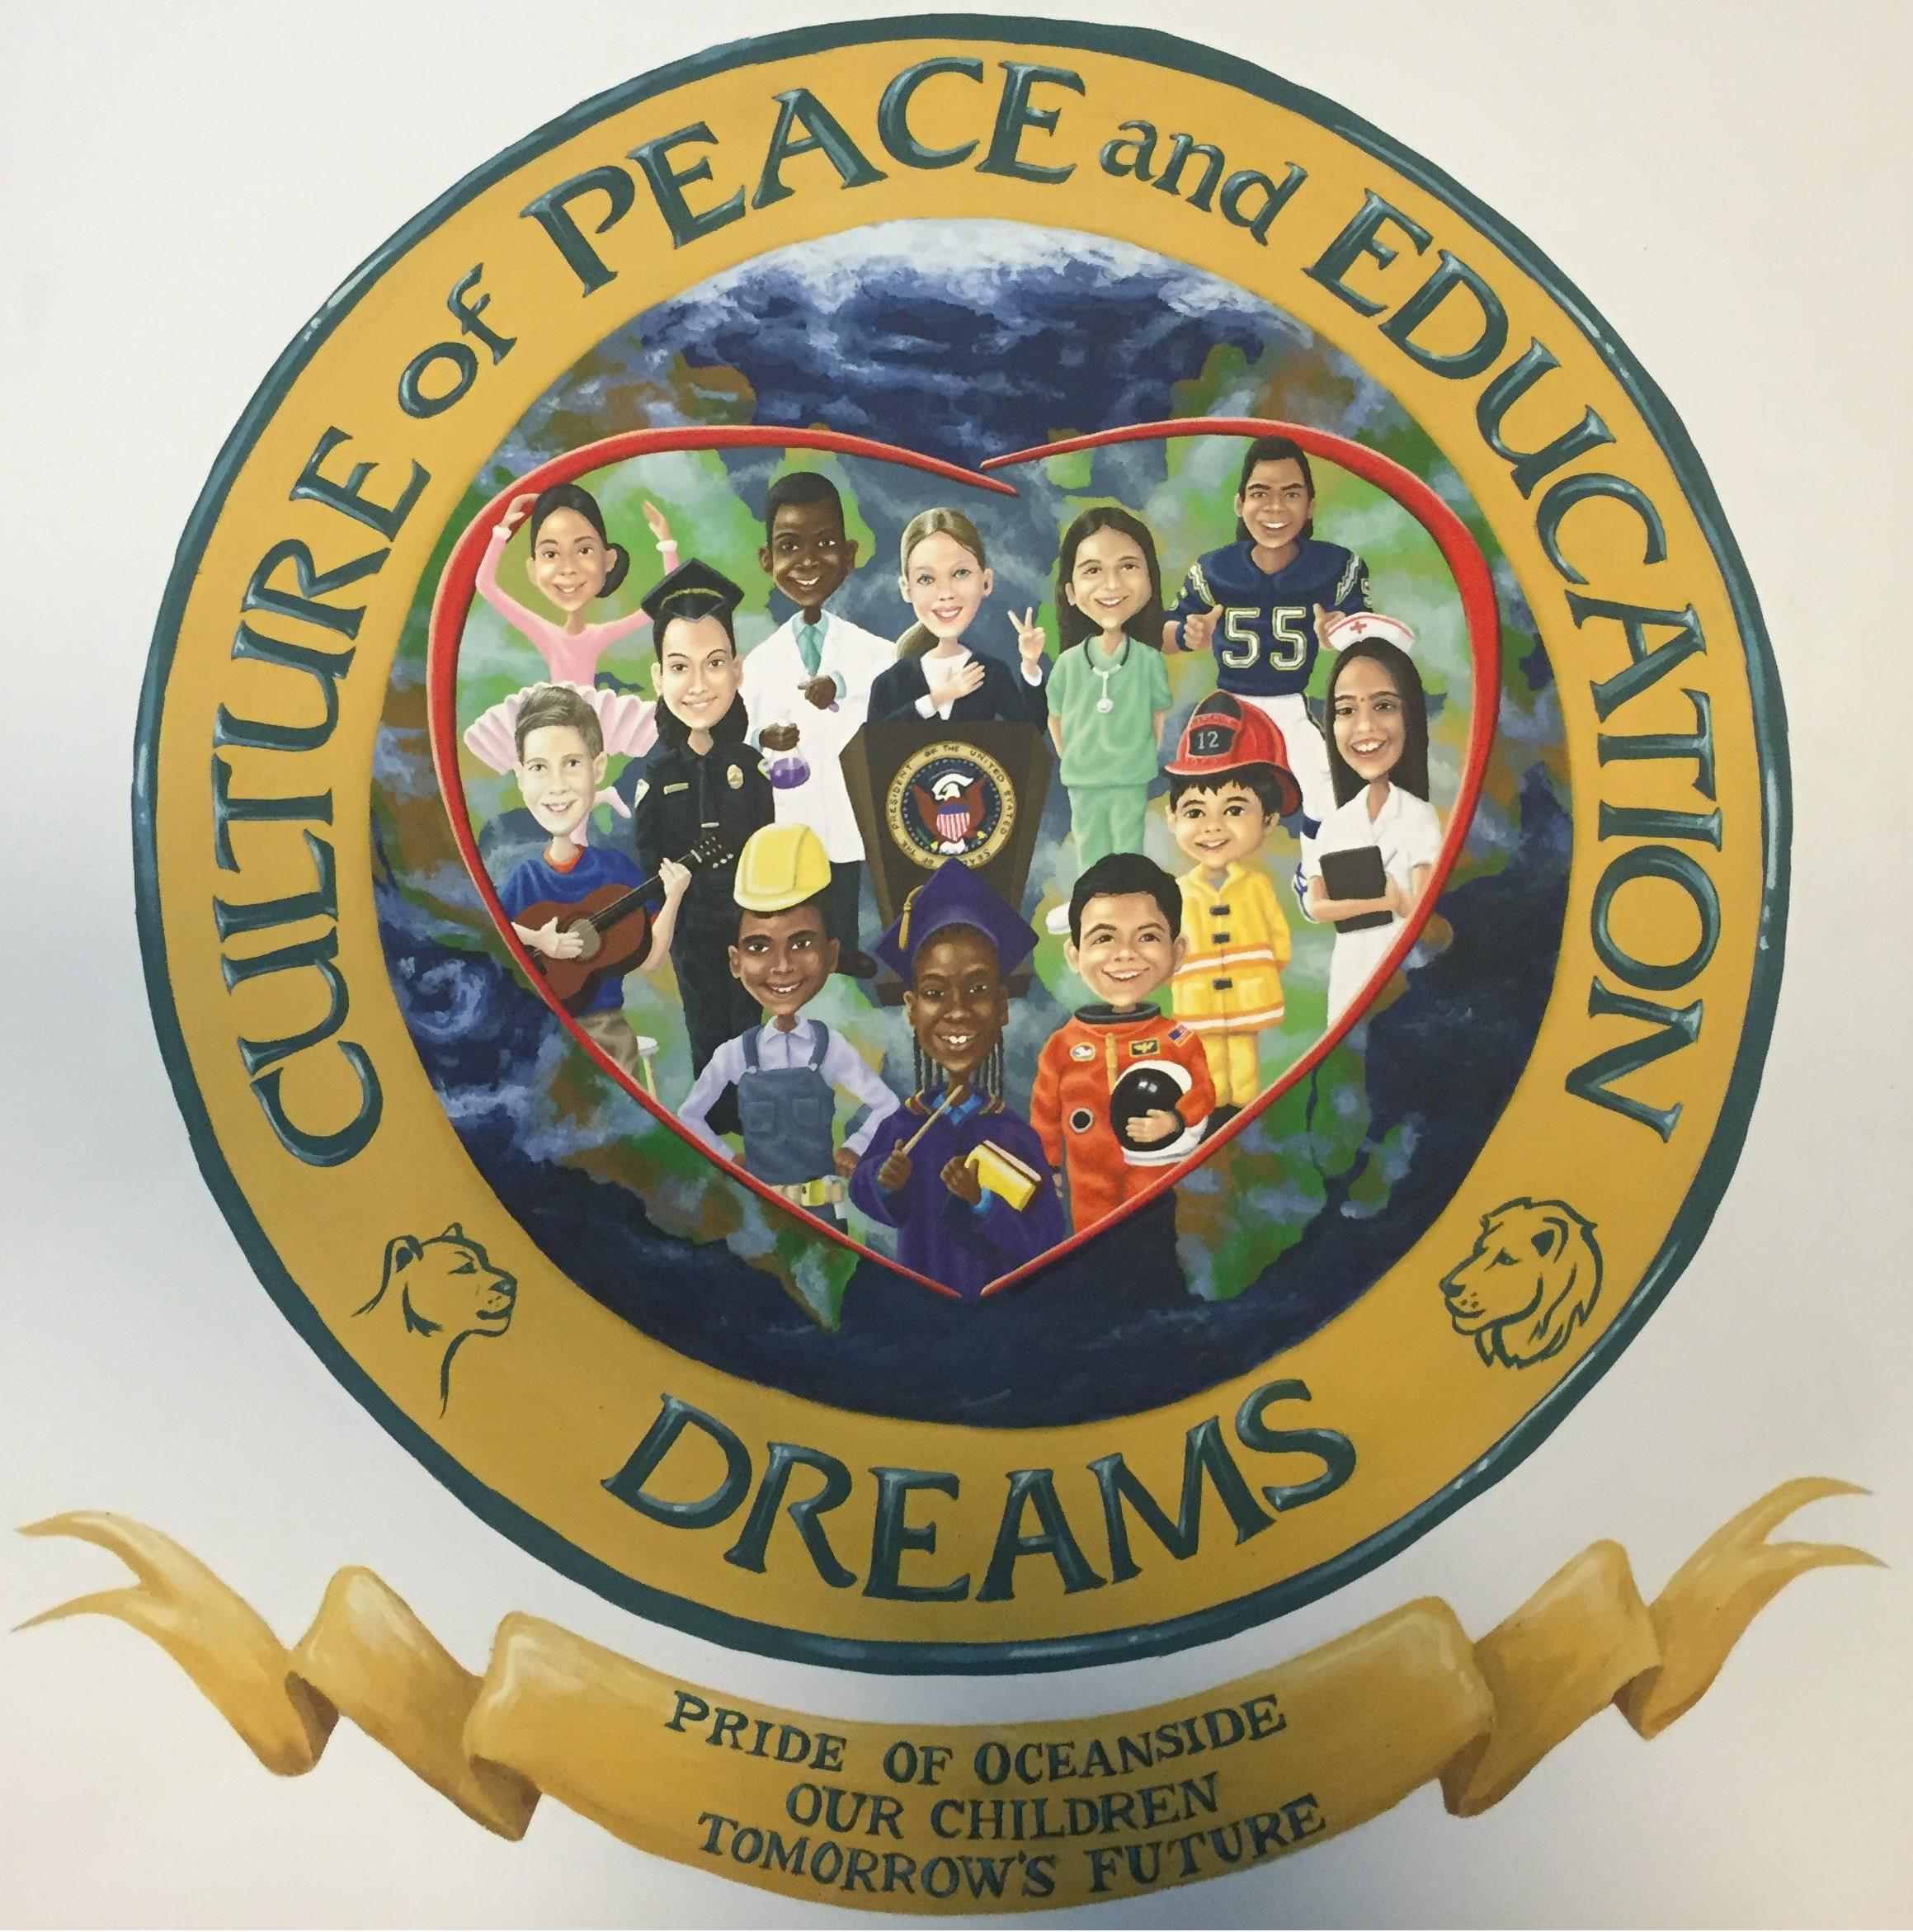  DREAMS CULTURE OF PEACE AND EDUCATION PRIDE OF OCEANSIDE OUR CHILDREN TOMORROW'S FUTURE